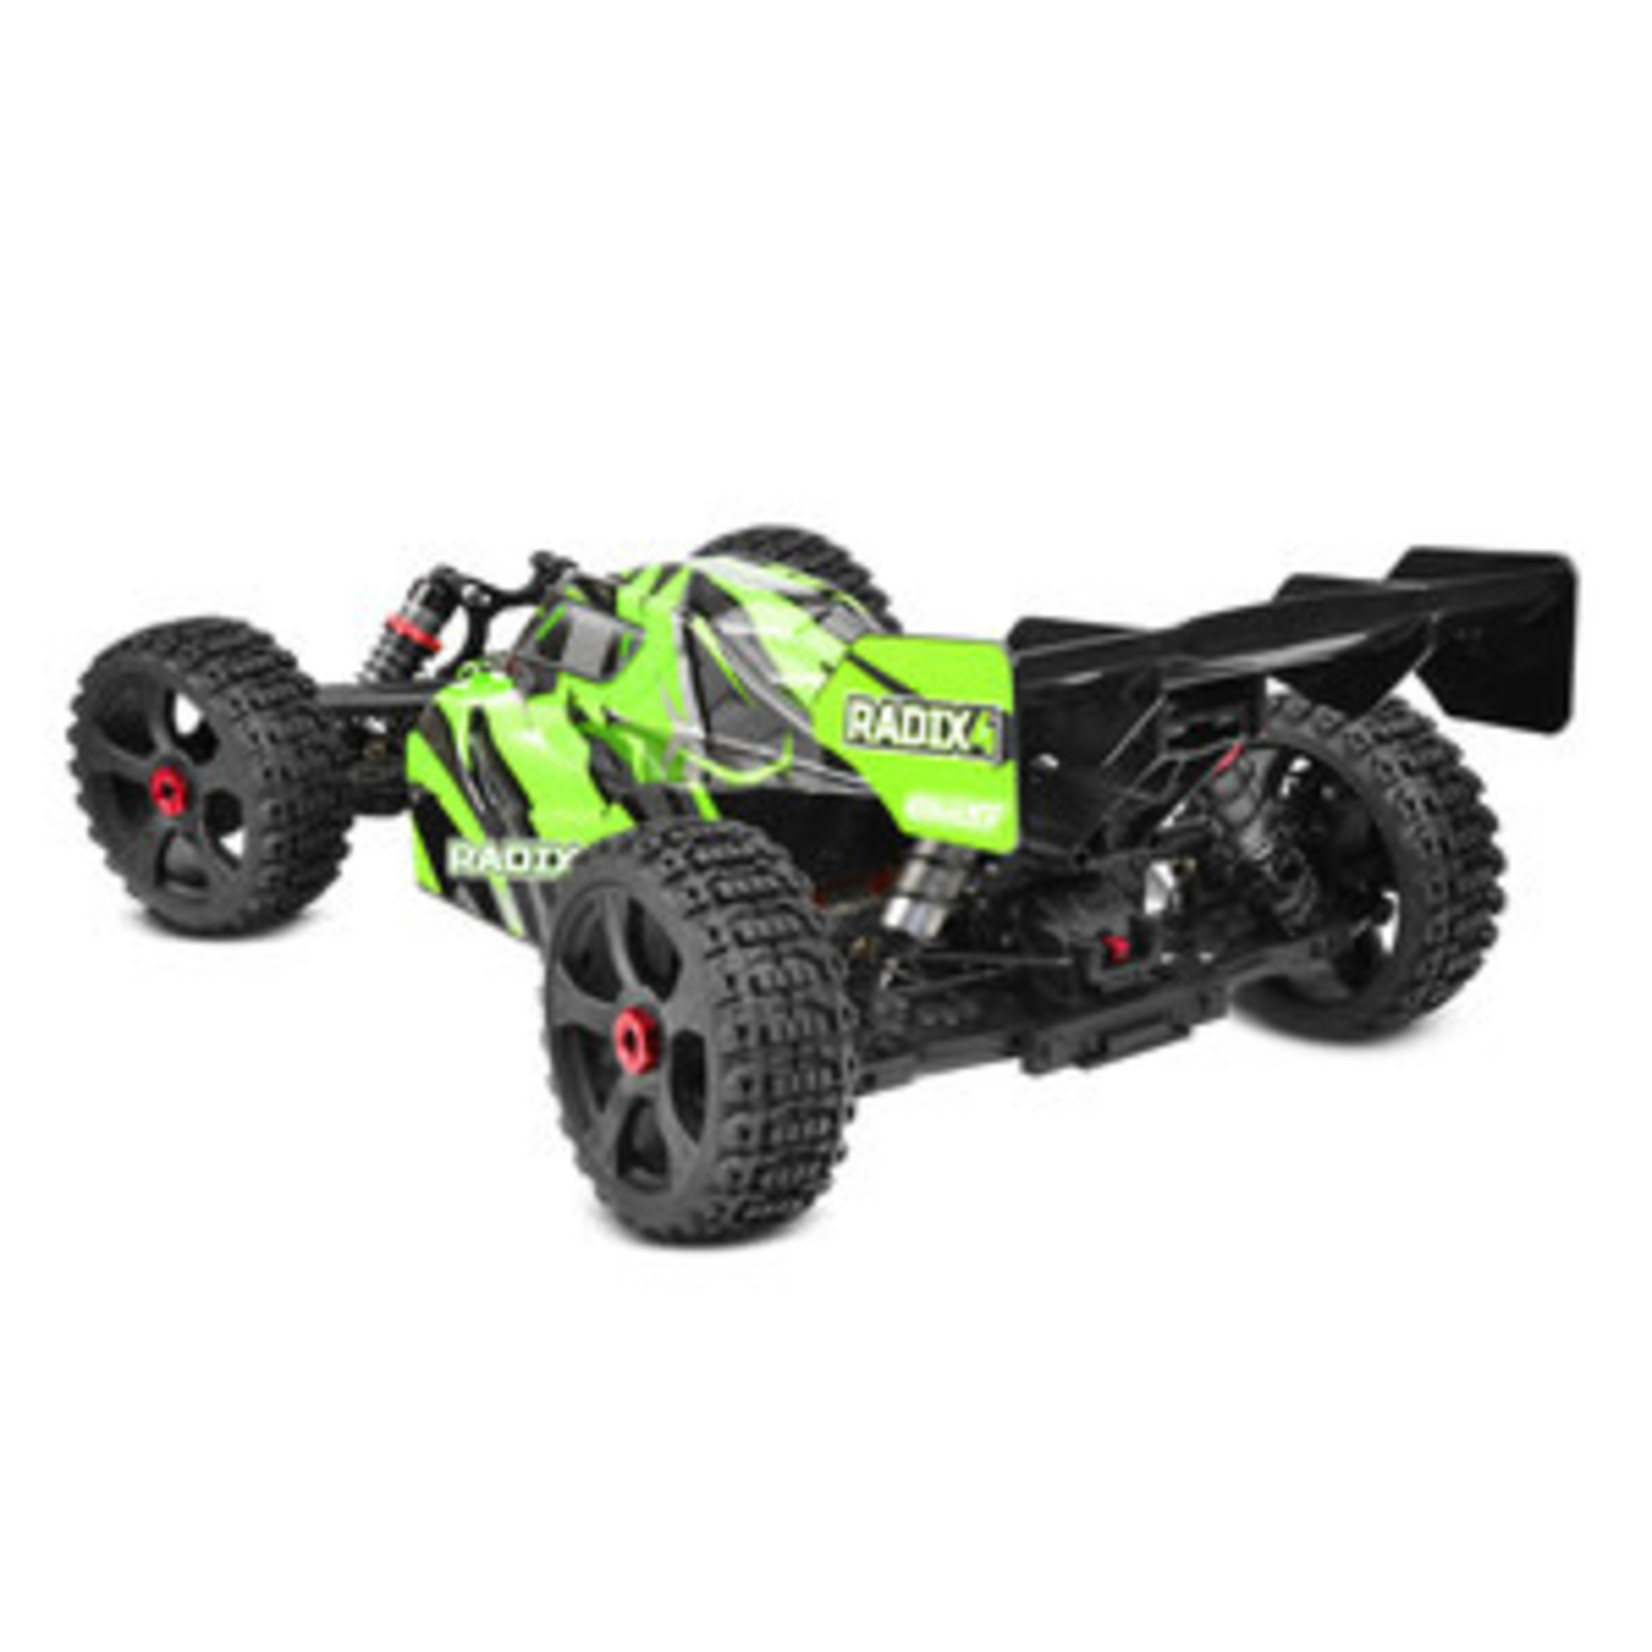 Corally 1/8 Radix4 XP 4WD 4S Brushless RTR Buggy (No Battery or Charger)